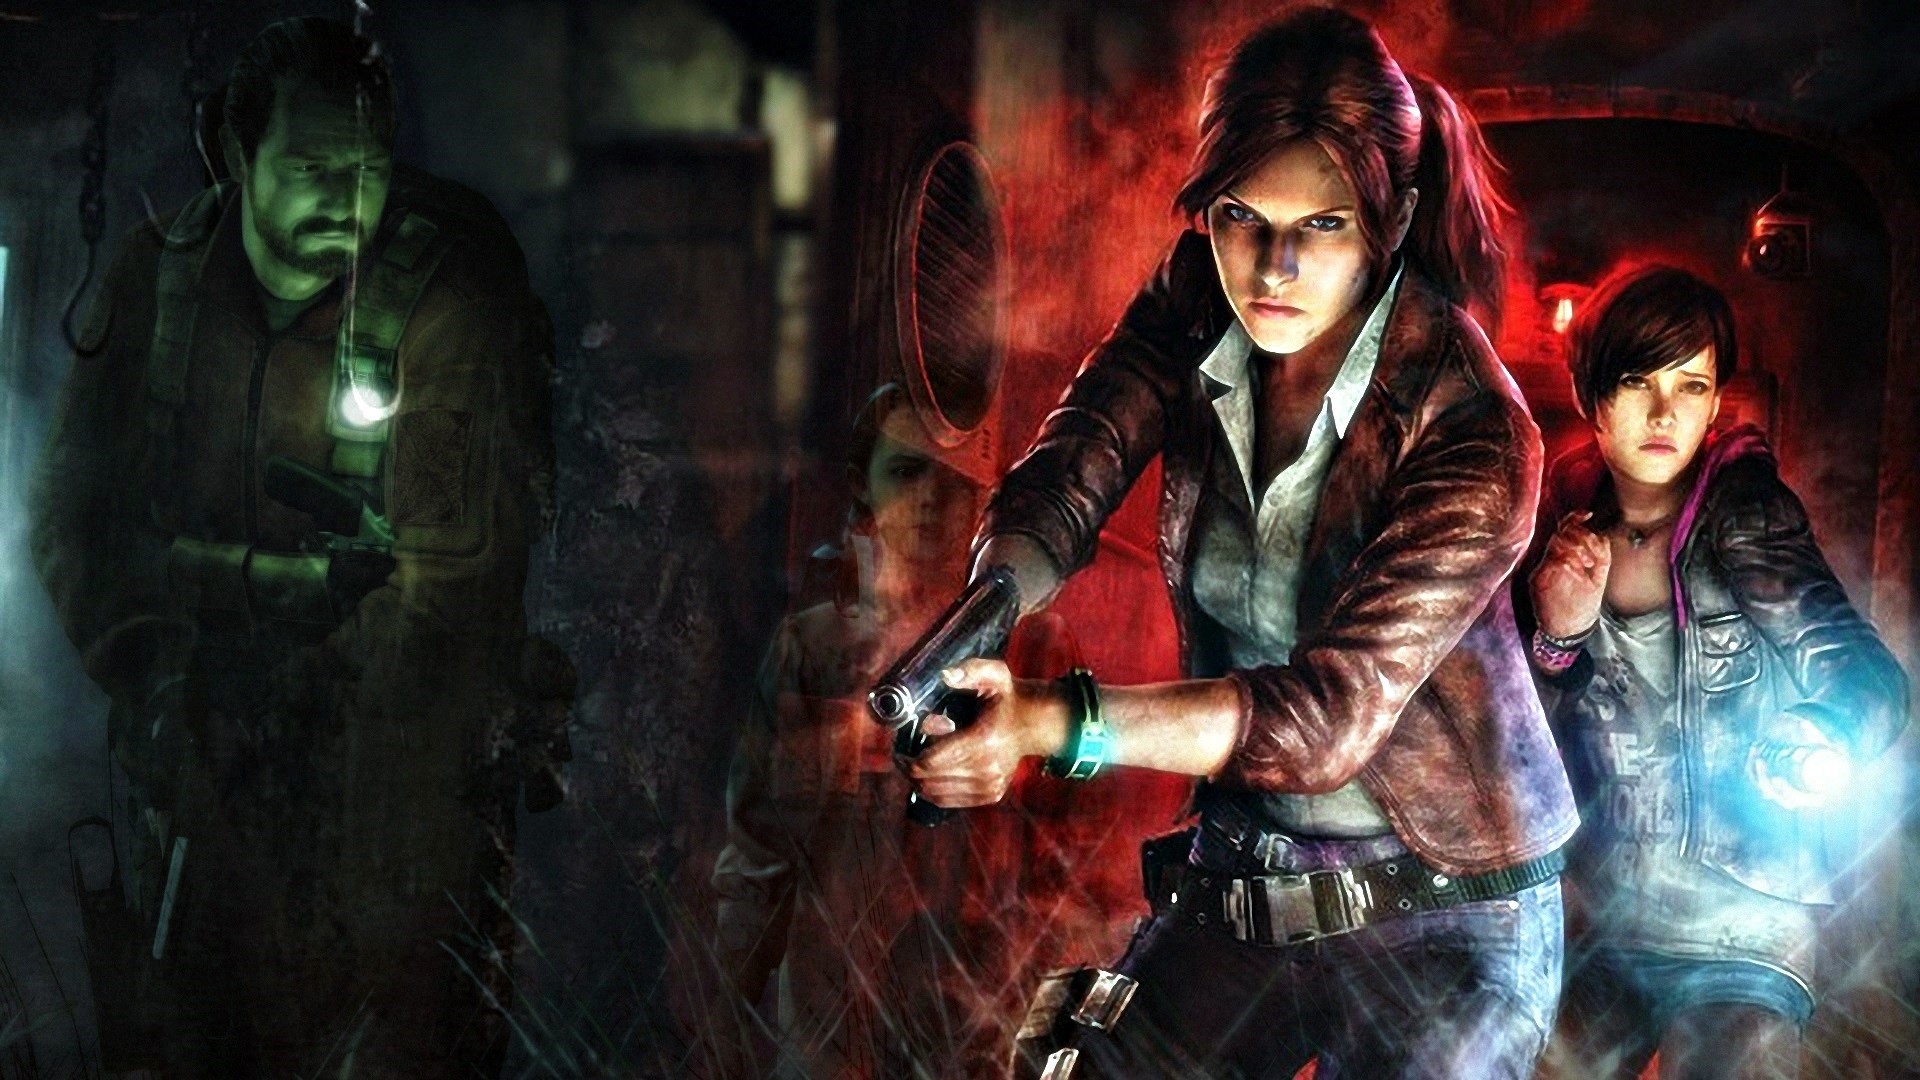 1920x1080 7 Resident Evil: Revelations 2 HD Wallpapers | Backgrounds - Wallpaper Abyss